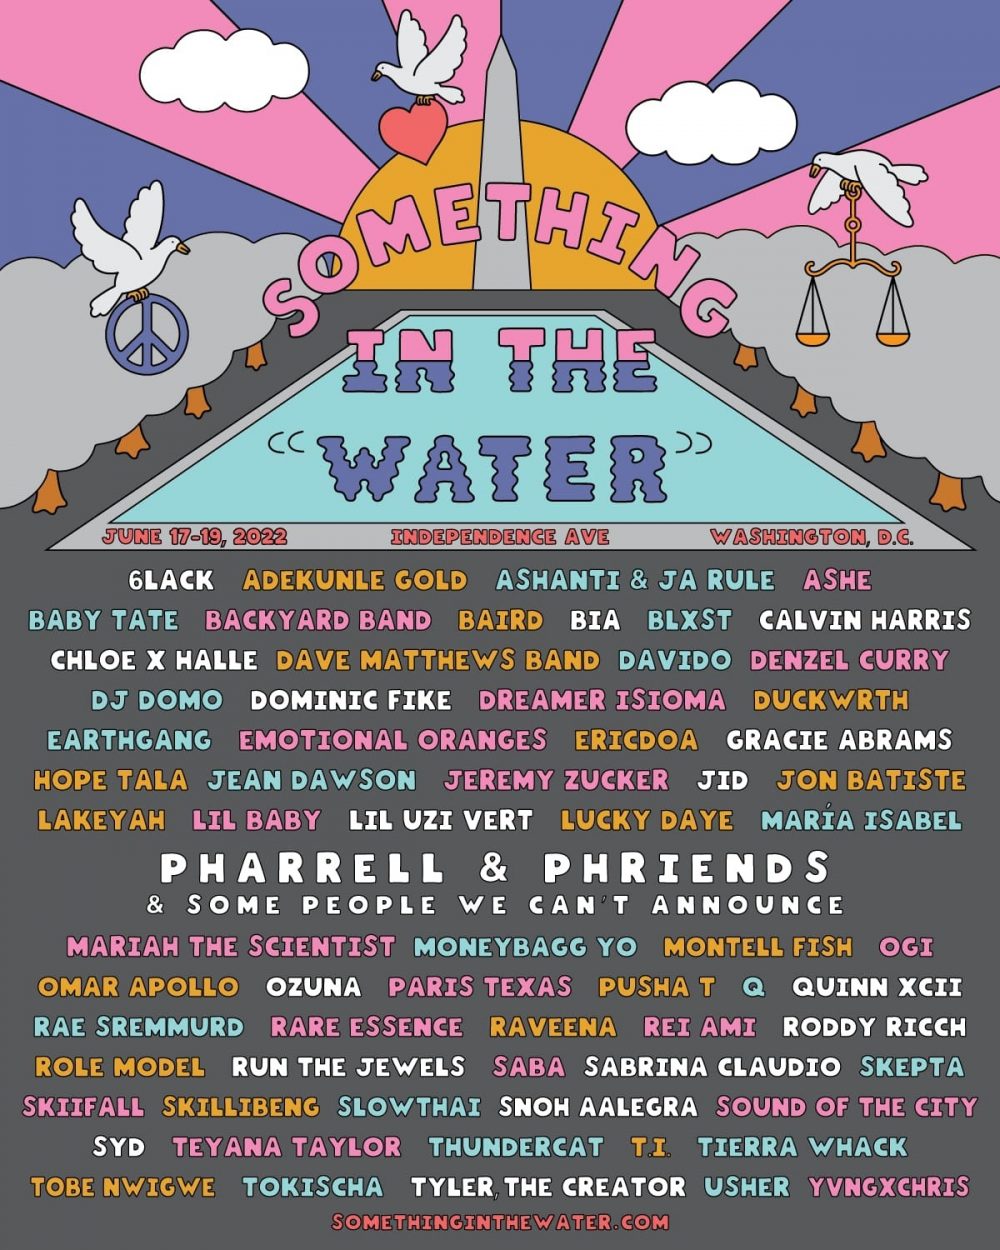 SZA, Clipse, Anderson .Paak And Q-Tip Added To Pharrell’s Something In The Water Festival